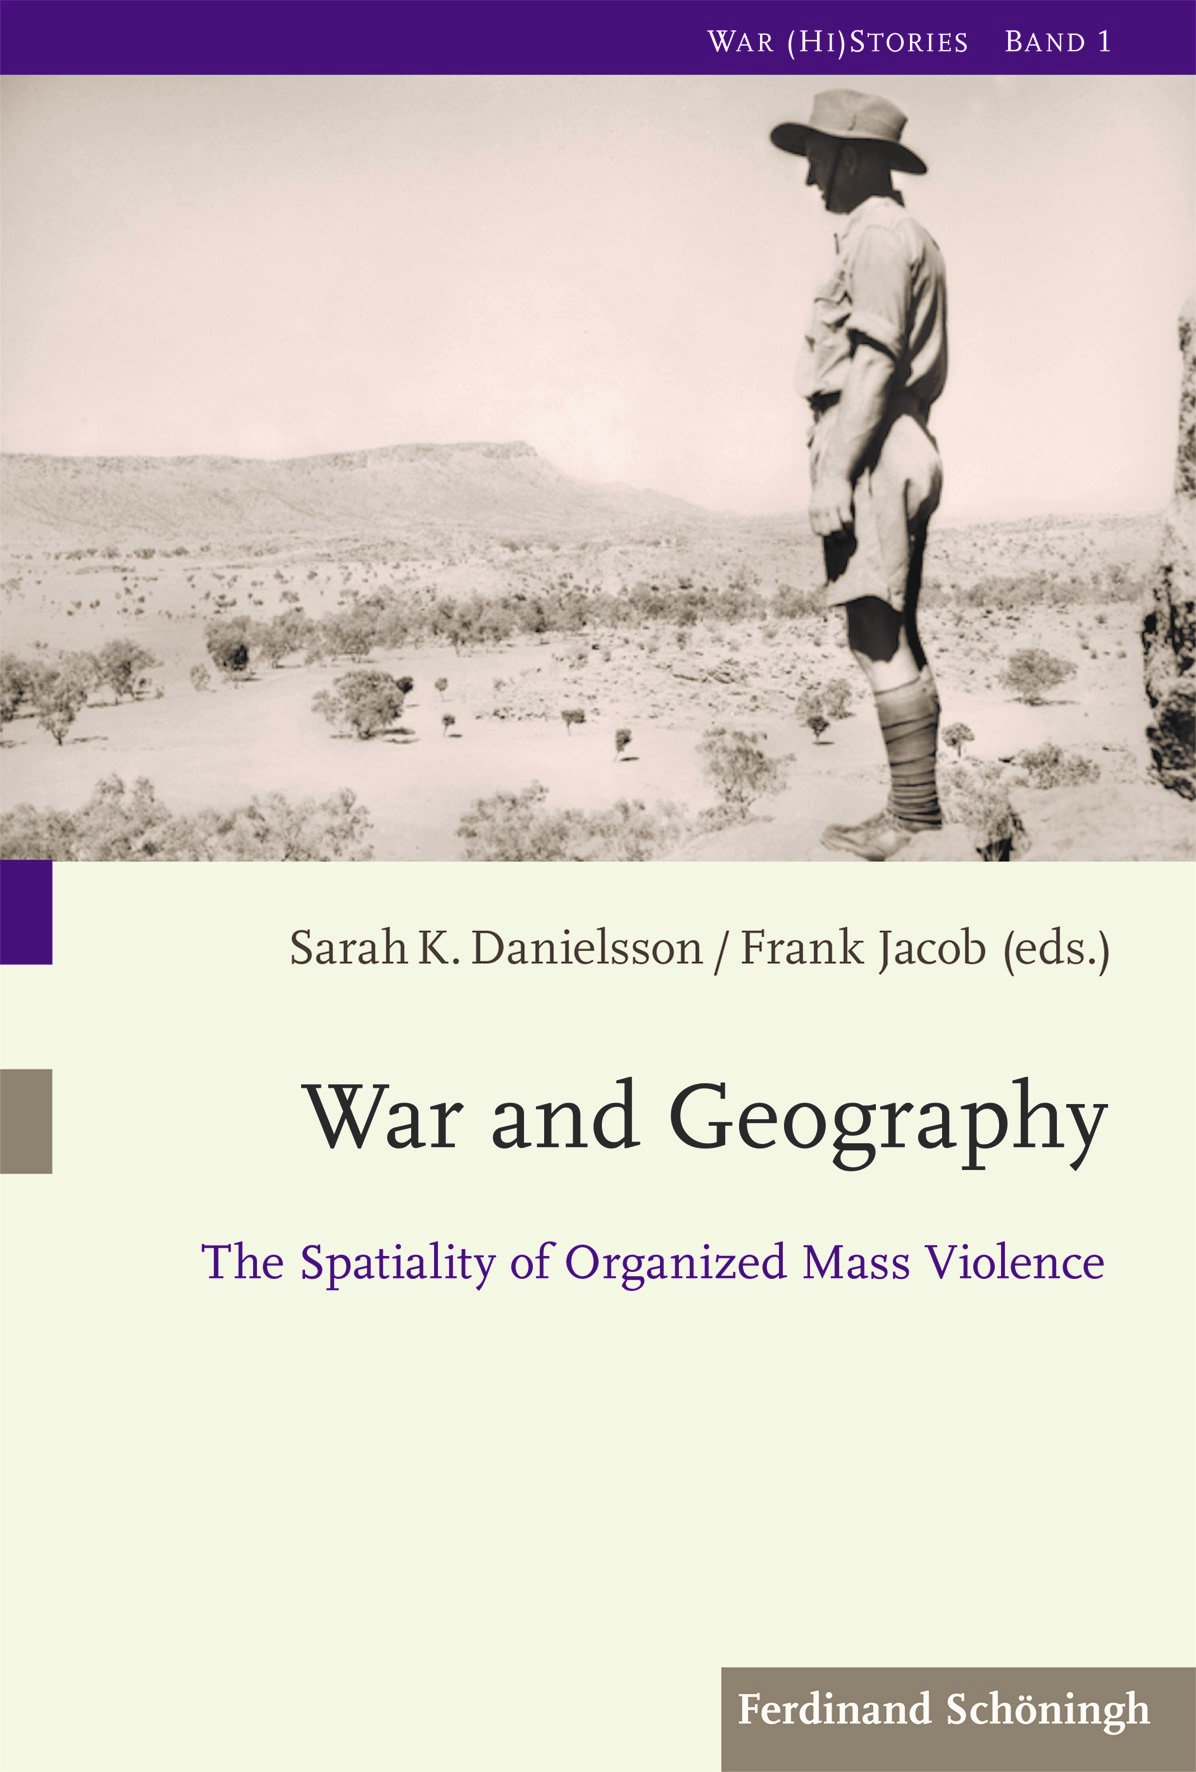 War and Geography by Danielsson and Jacob